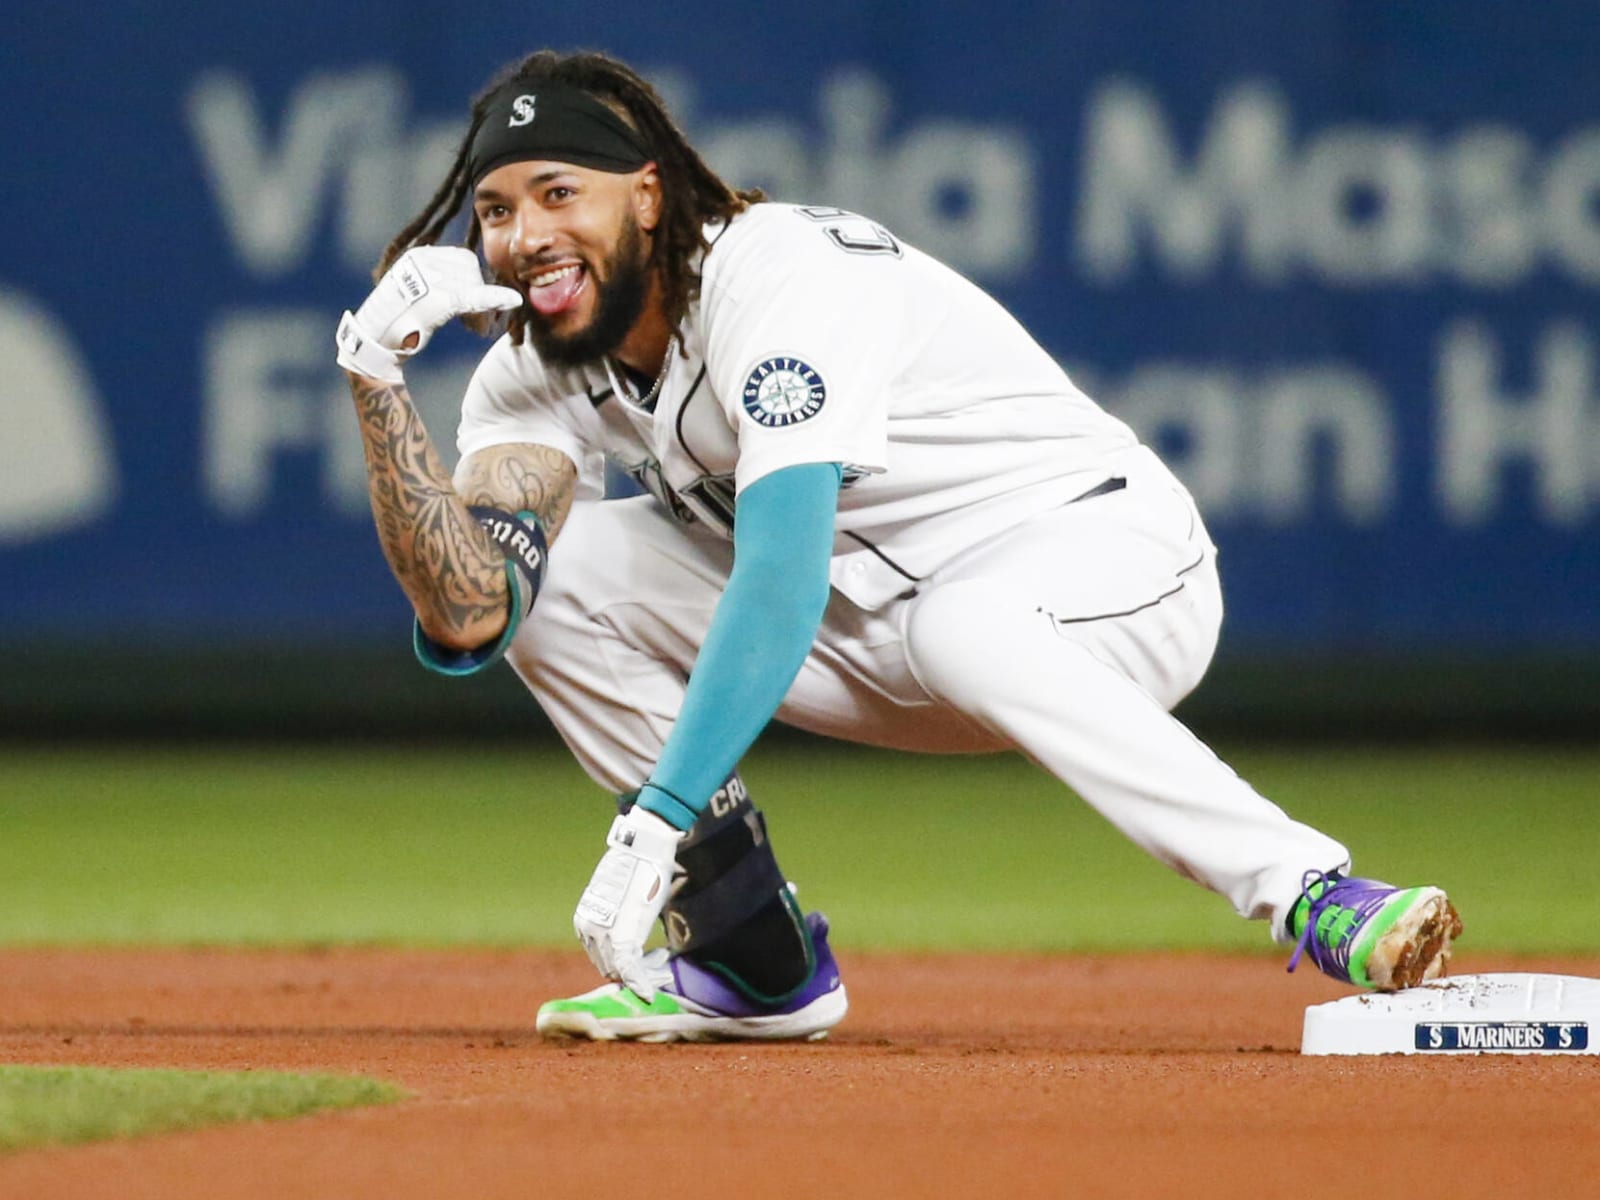 MLB: Mariners, J.P. Crawford agree to $51 million extension